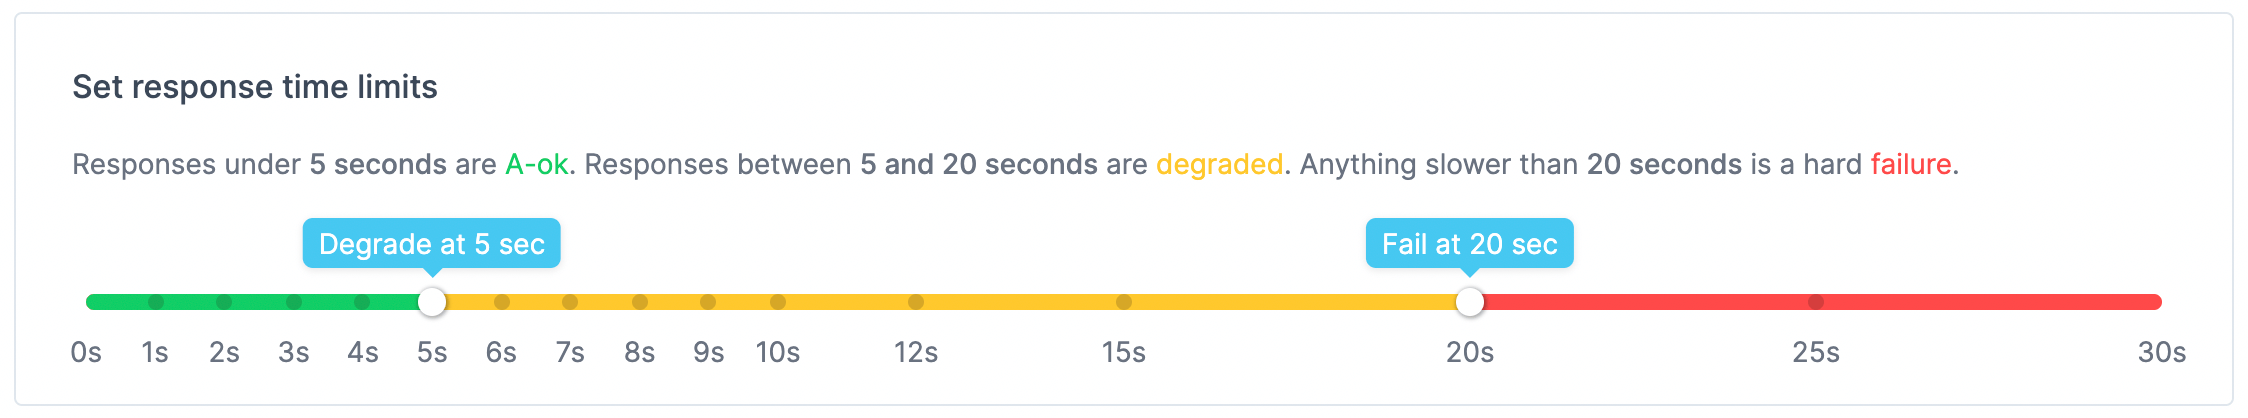 setting up response time limits in an api check